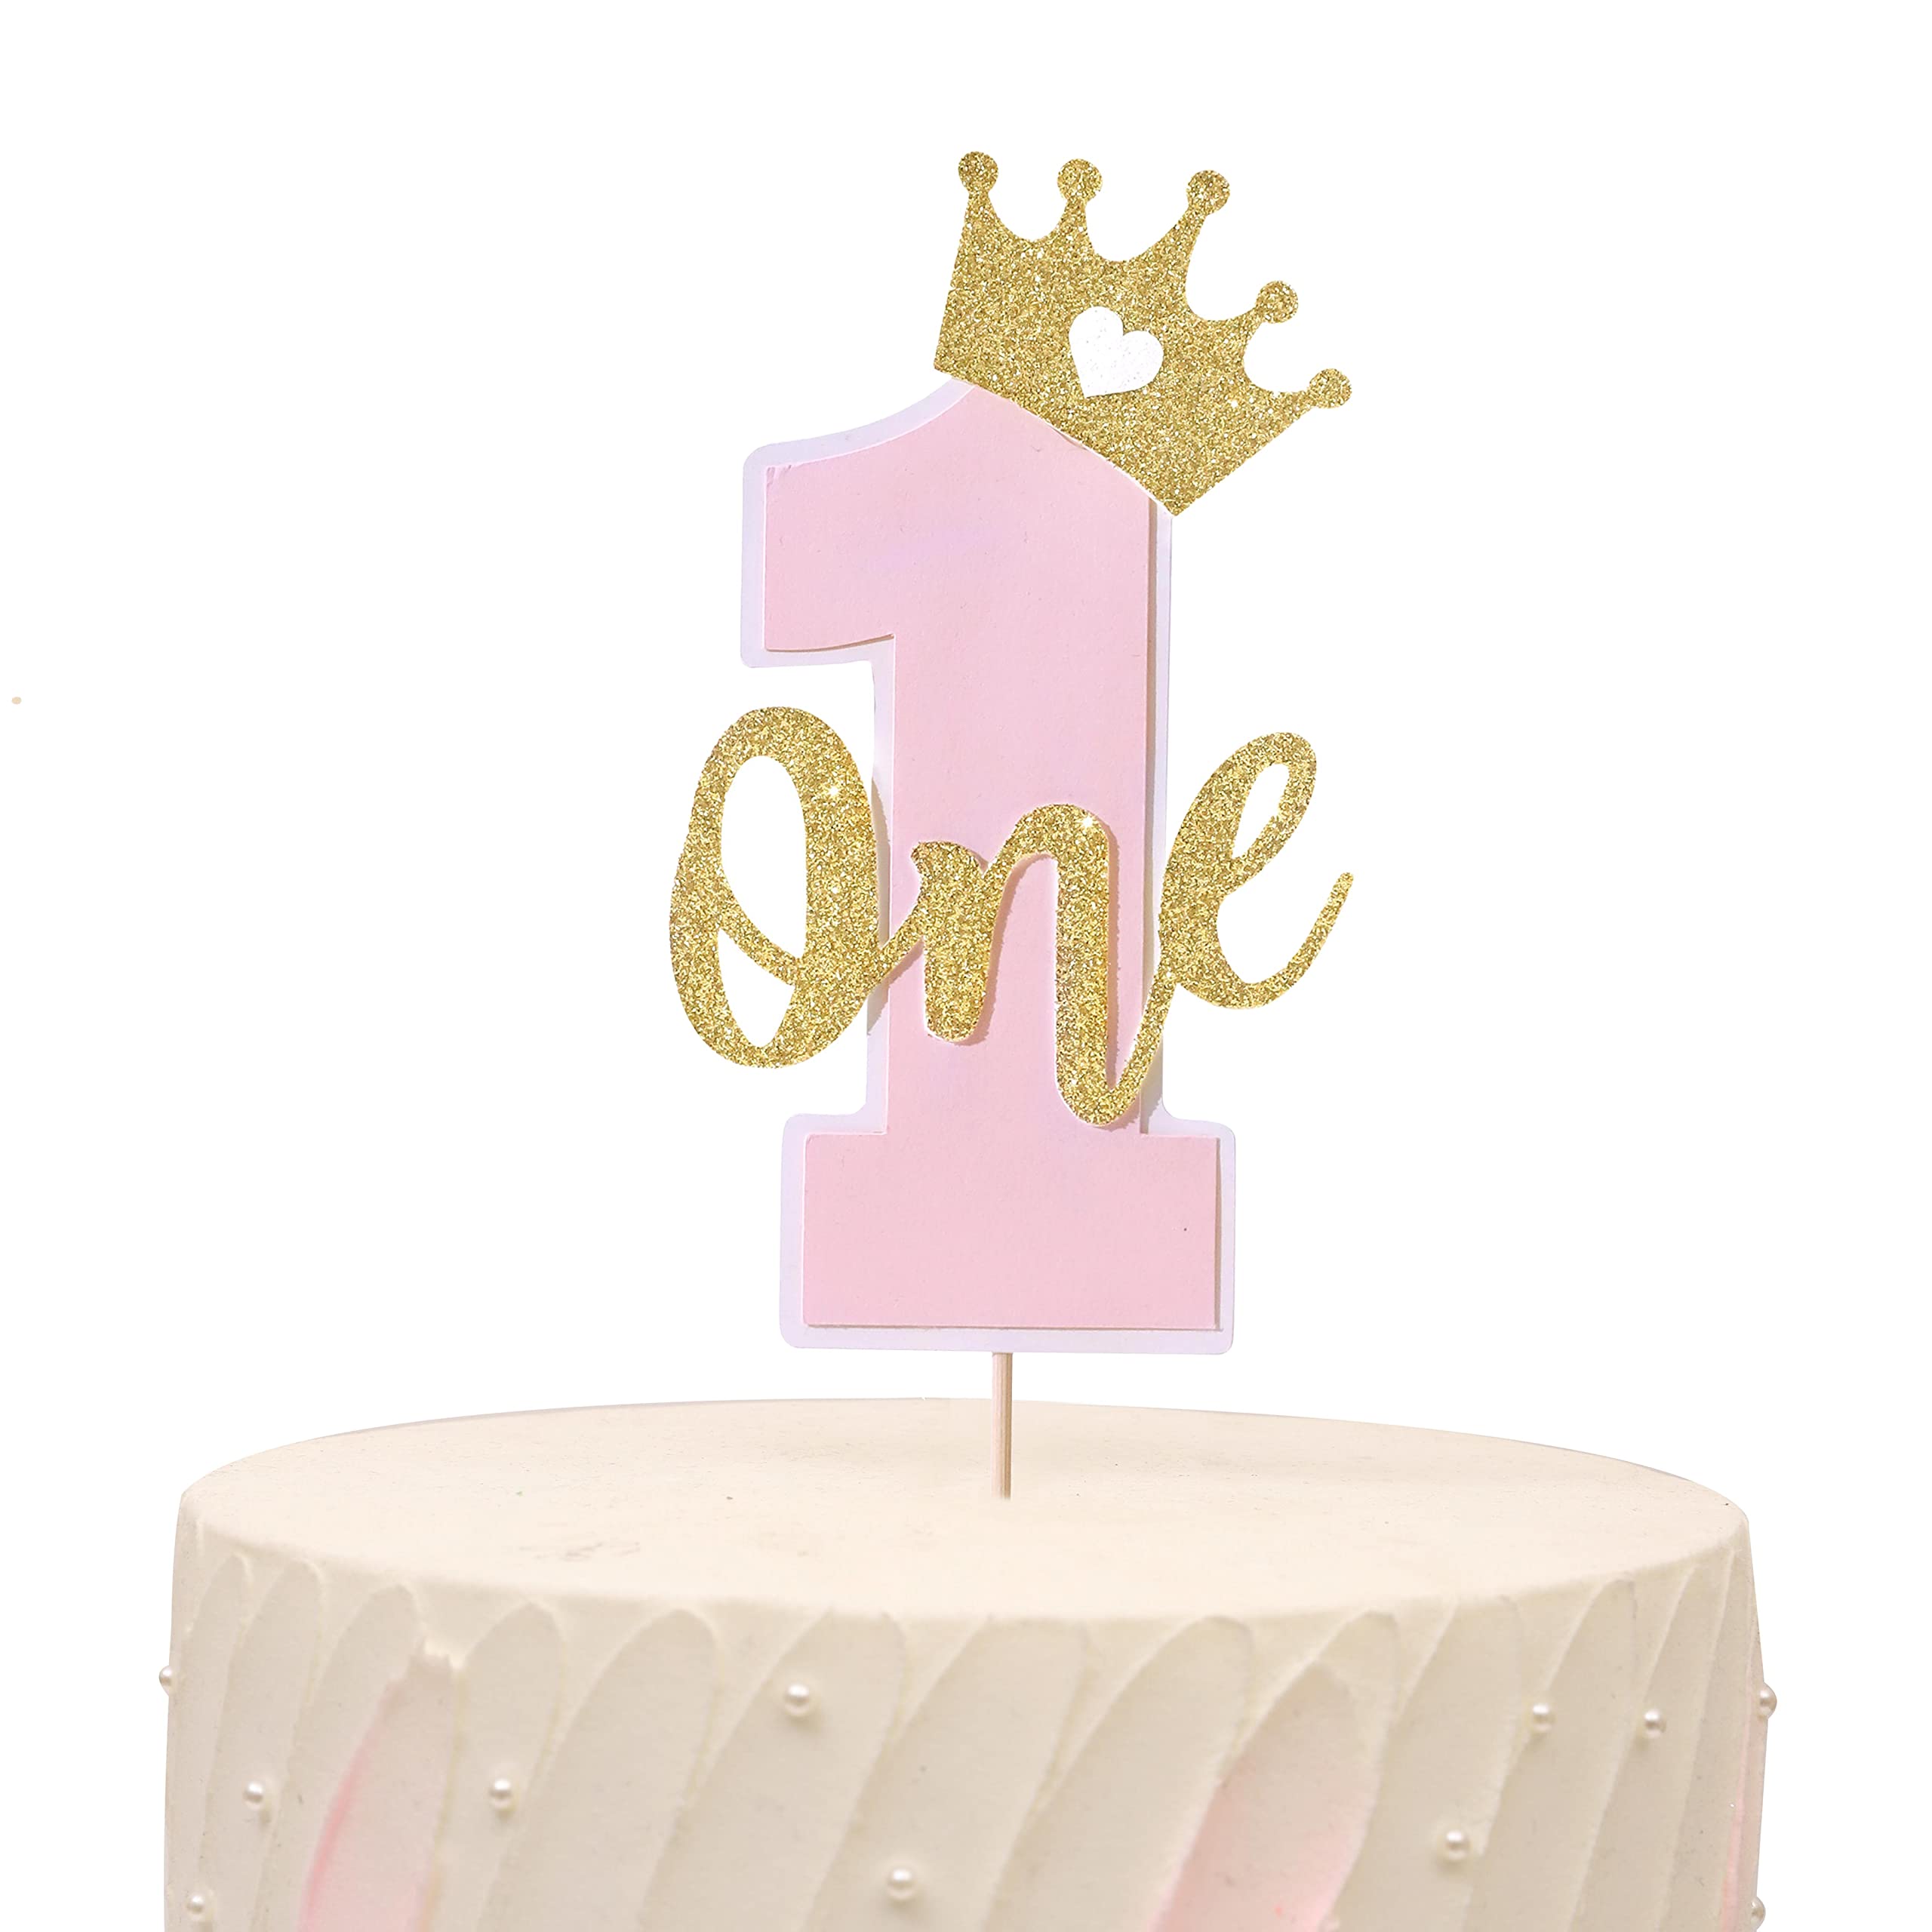 1/2 Way to One Glitter Cake Topper Halfway to One 6 Month - Etsy | Happy  half birthday, Birthday cake topper printable, Cake toppers